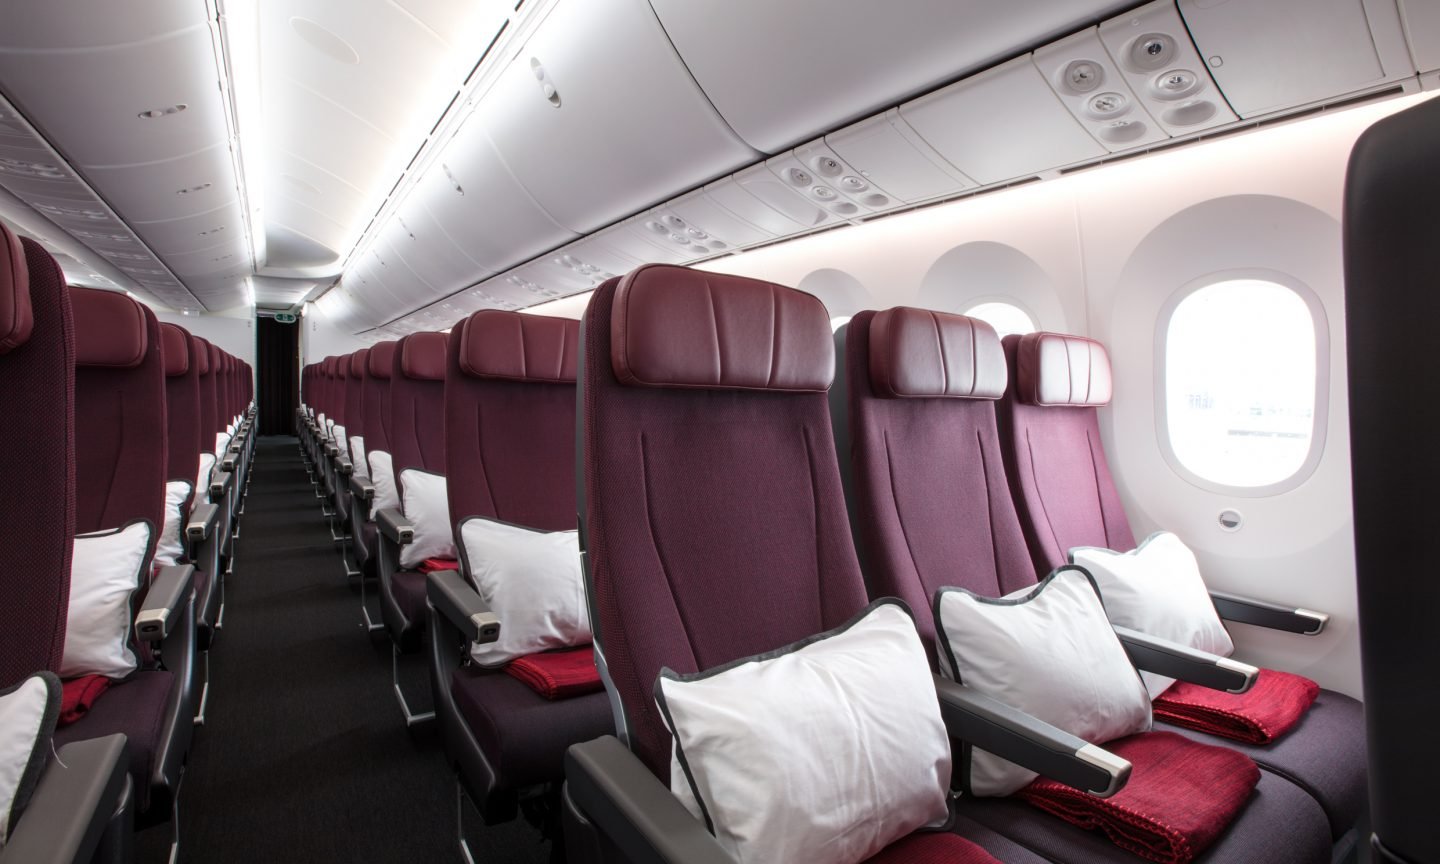 How To Make The Most Of Qantas Economy Class - Nerdwallet